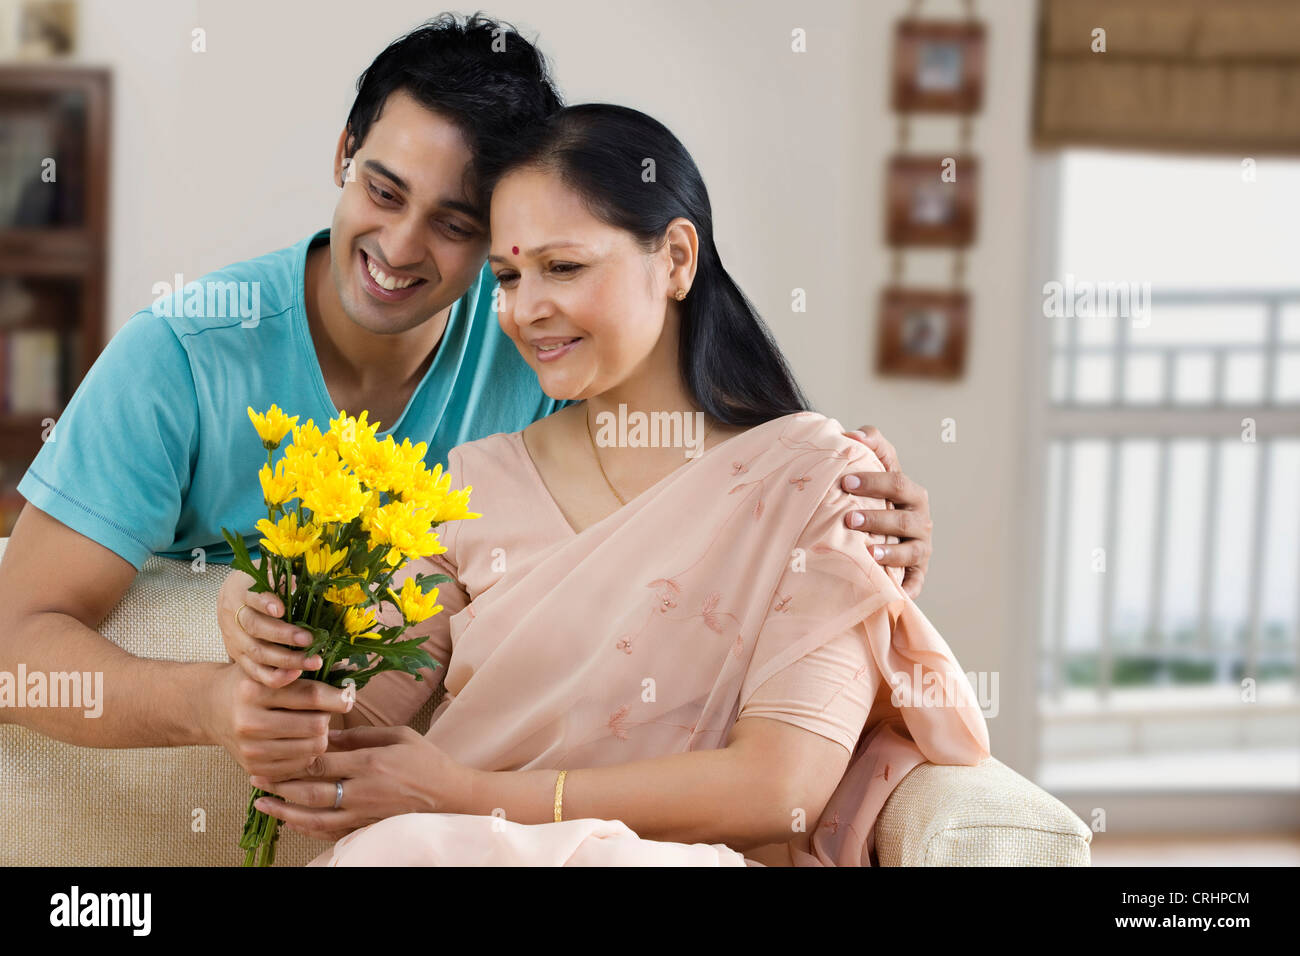 young man gifting bunch of flowers to his mother Stock Photo